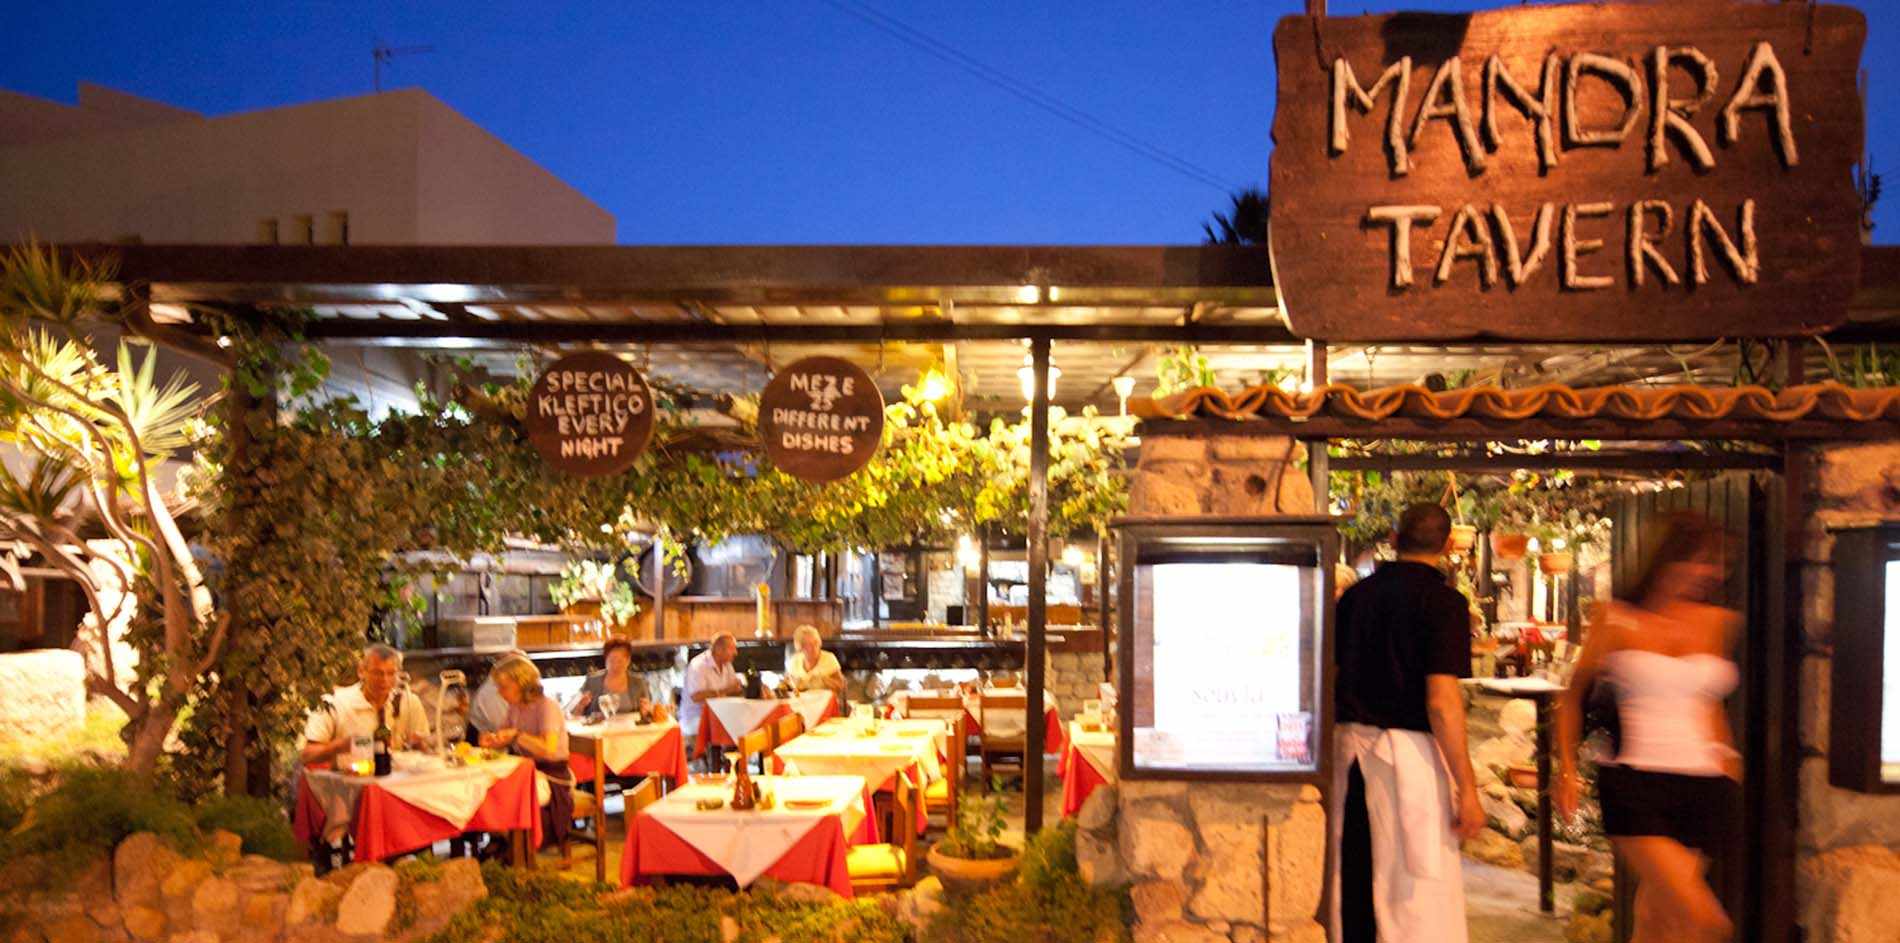 Interview with the director of Mandra Tavern in Pafos